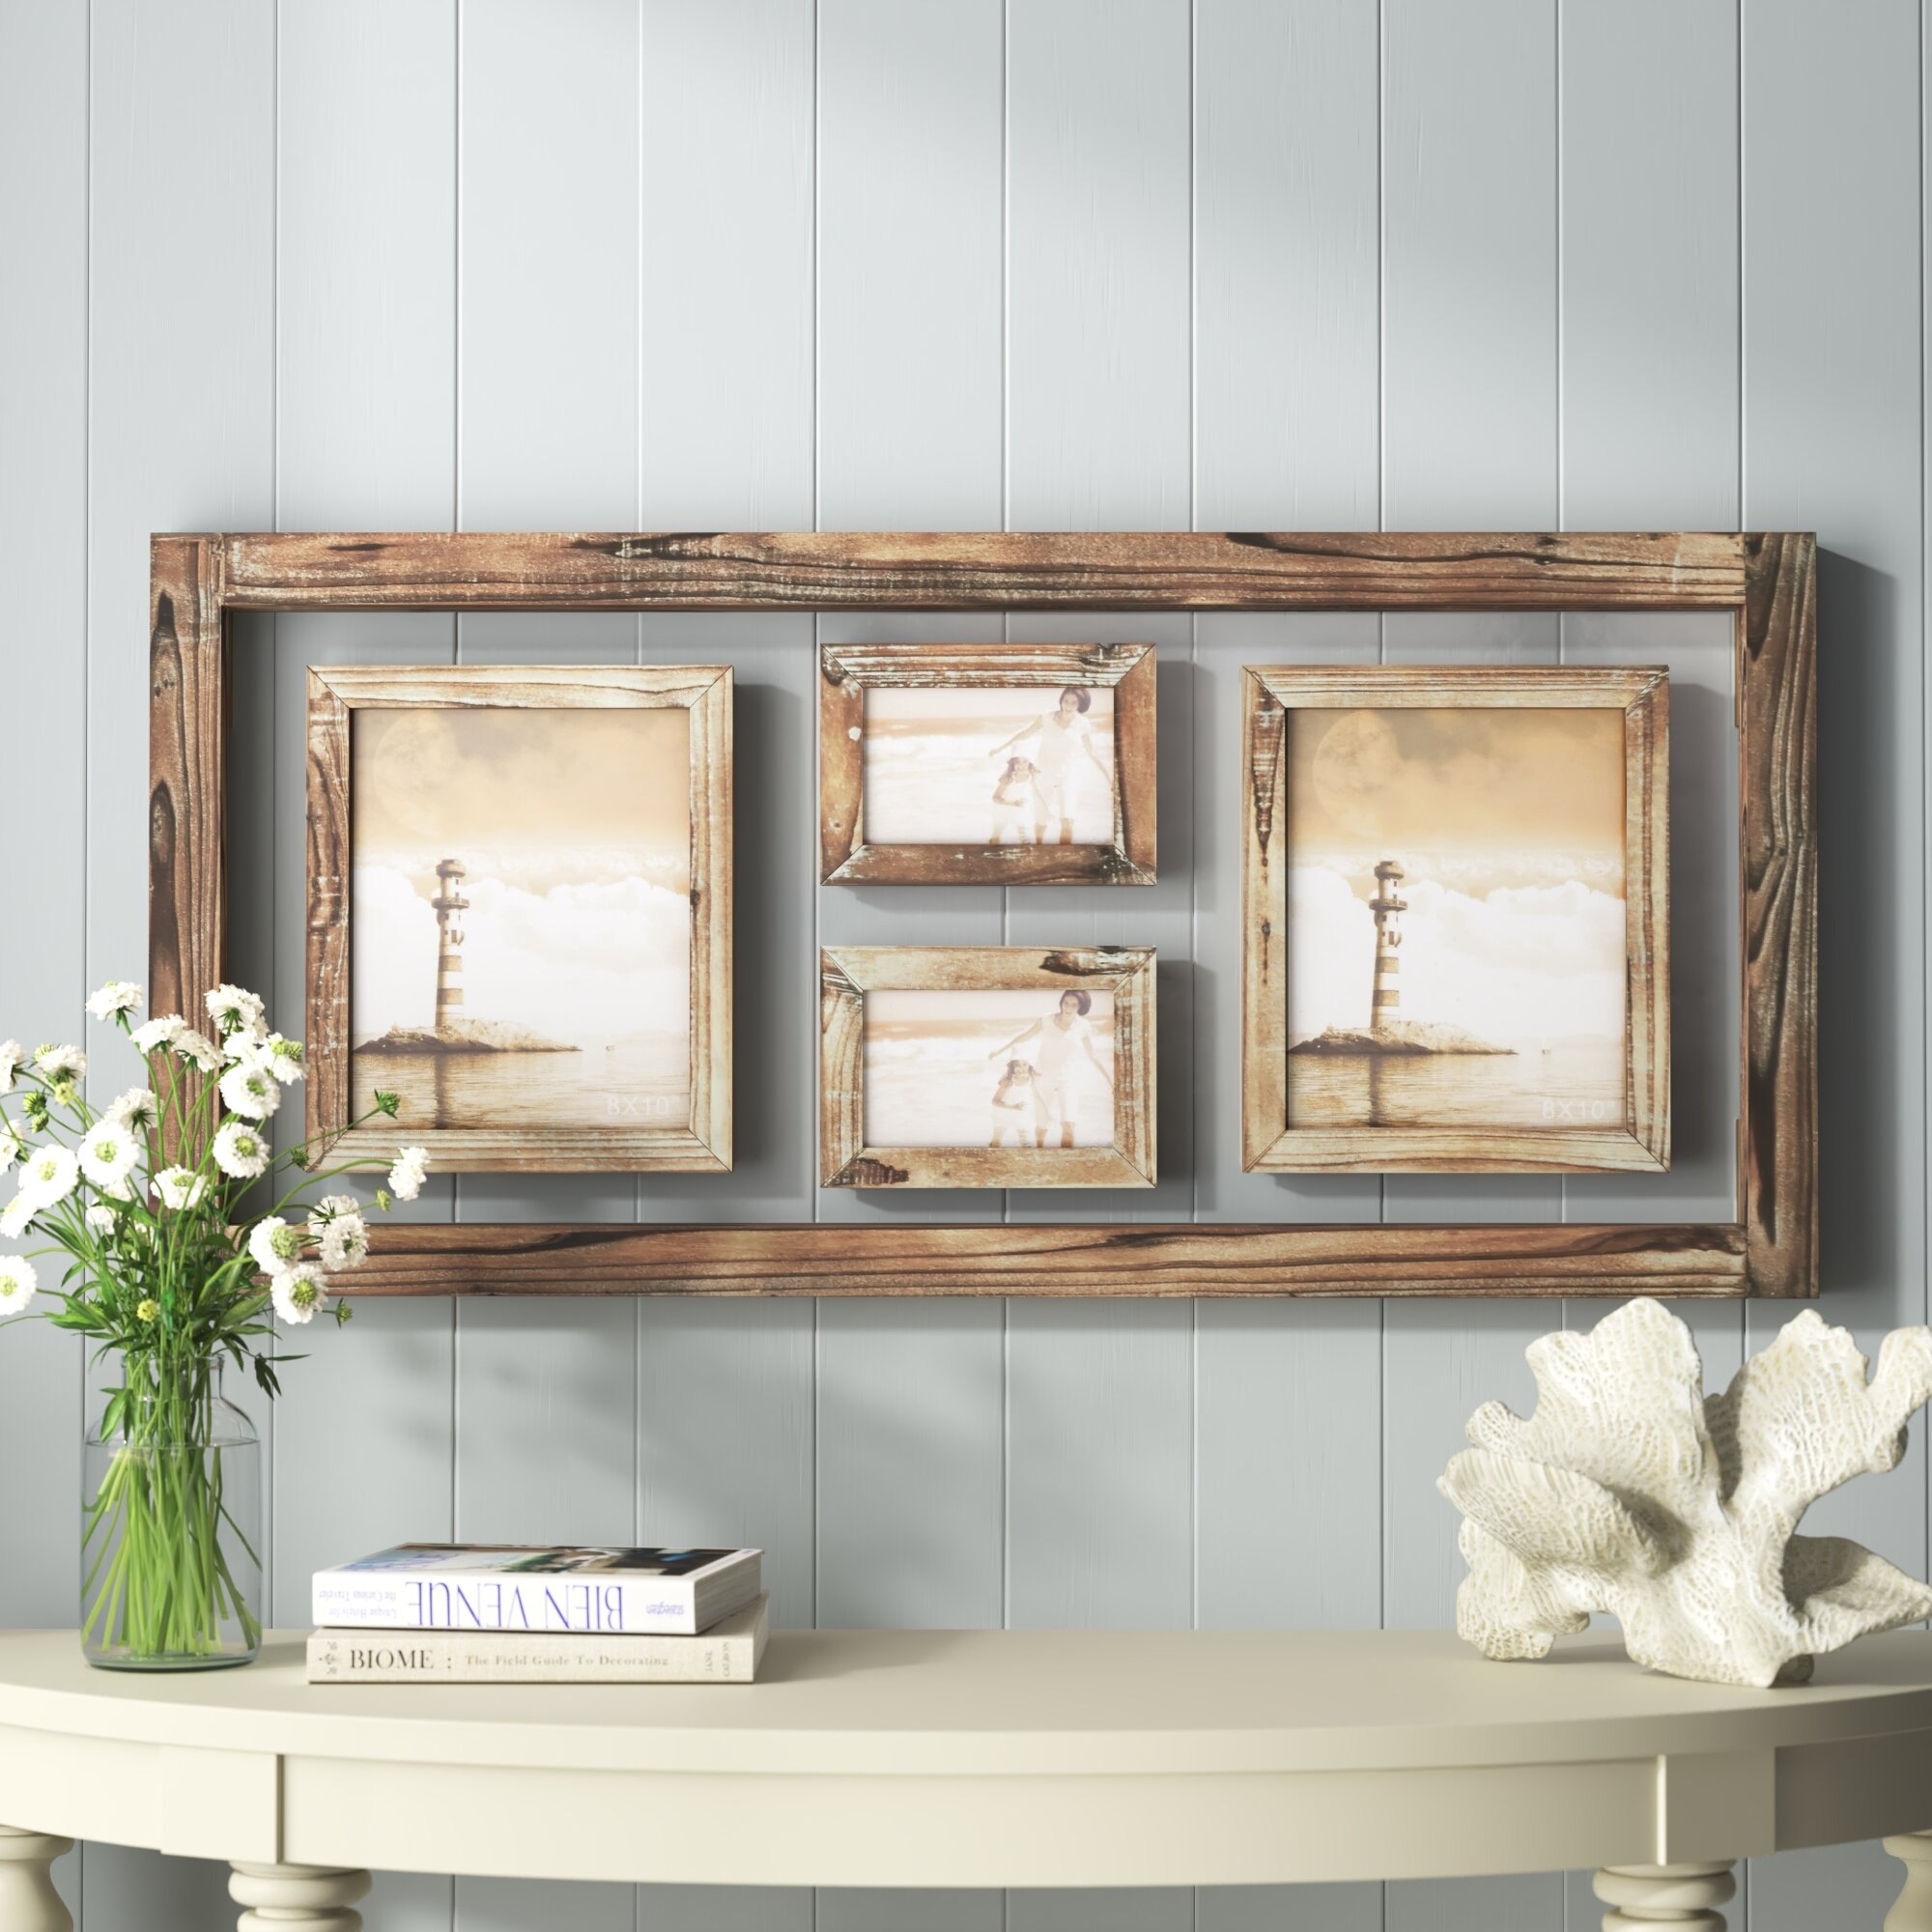 4x6 Wooden Picture Frame - Garden Ground Outfitters